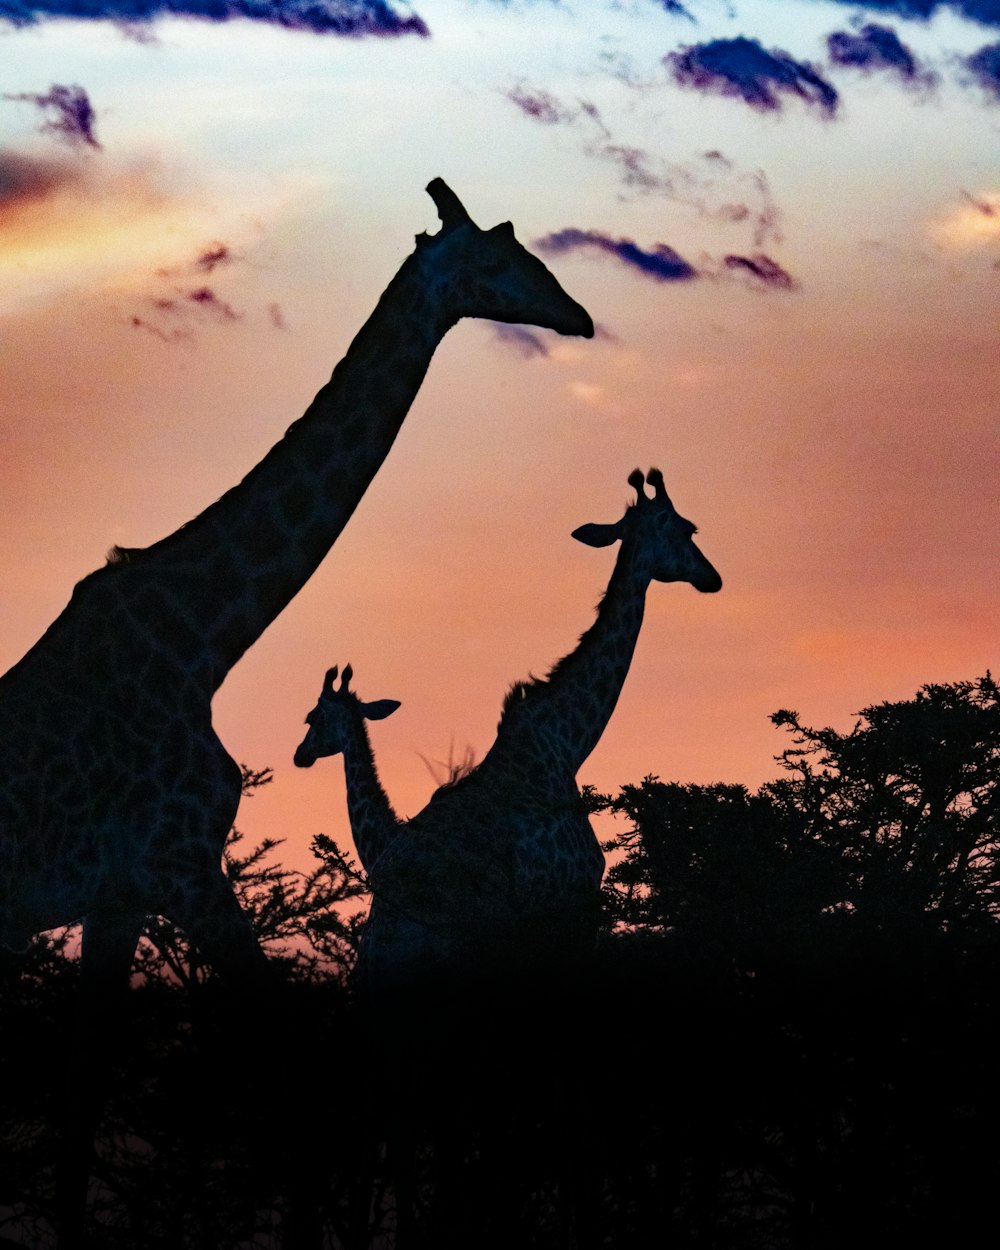 giraffes standing in front of a sunset